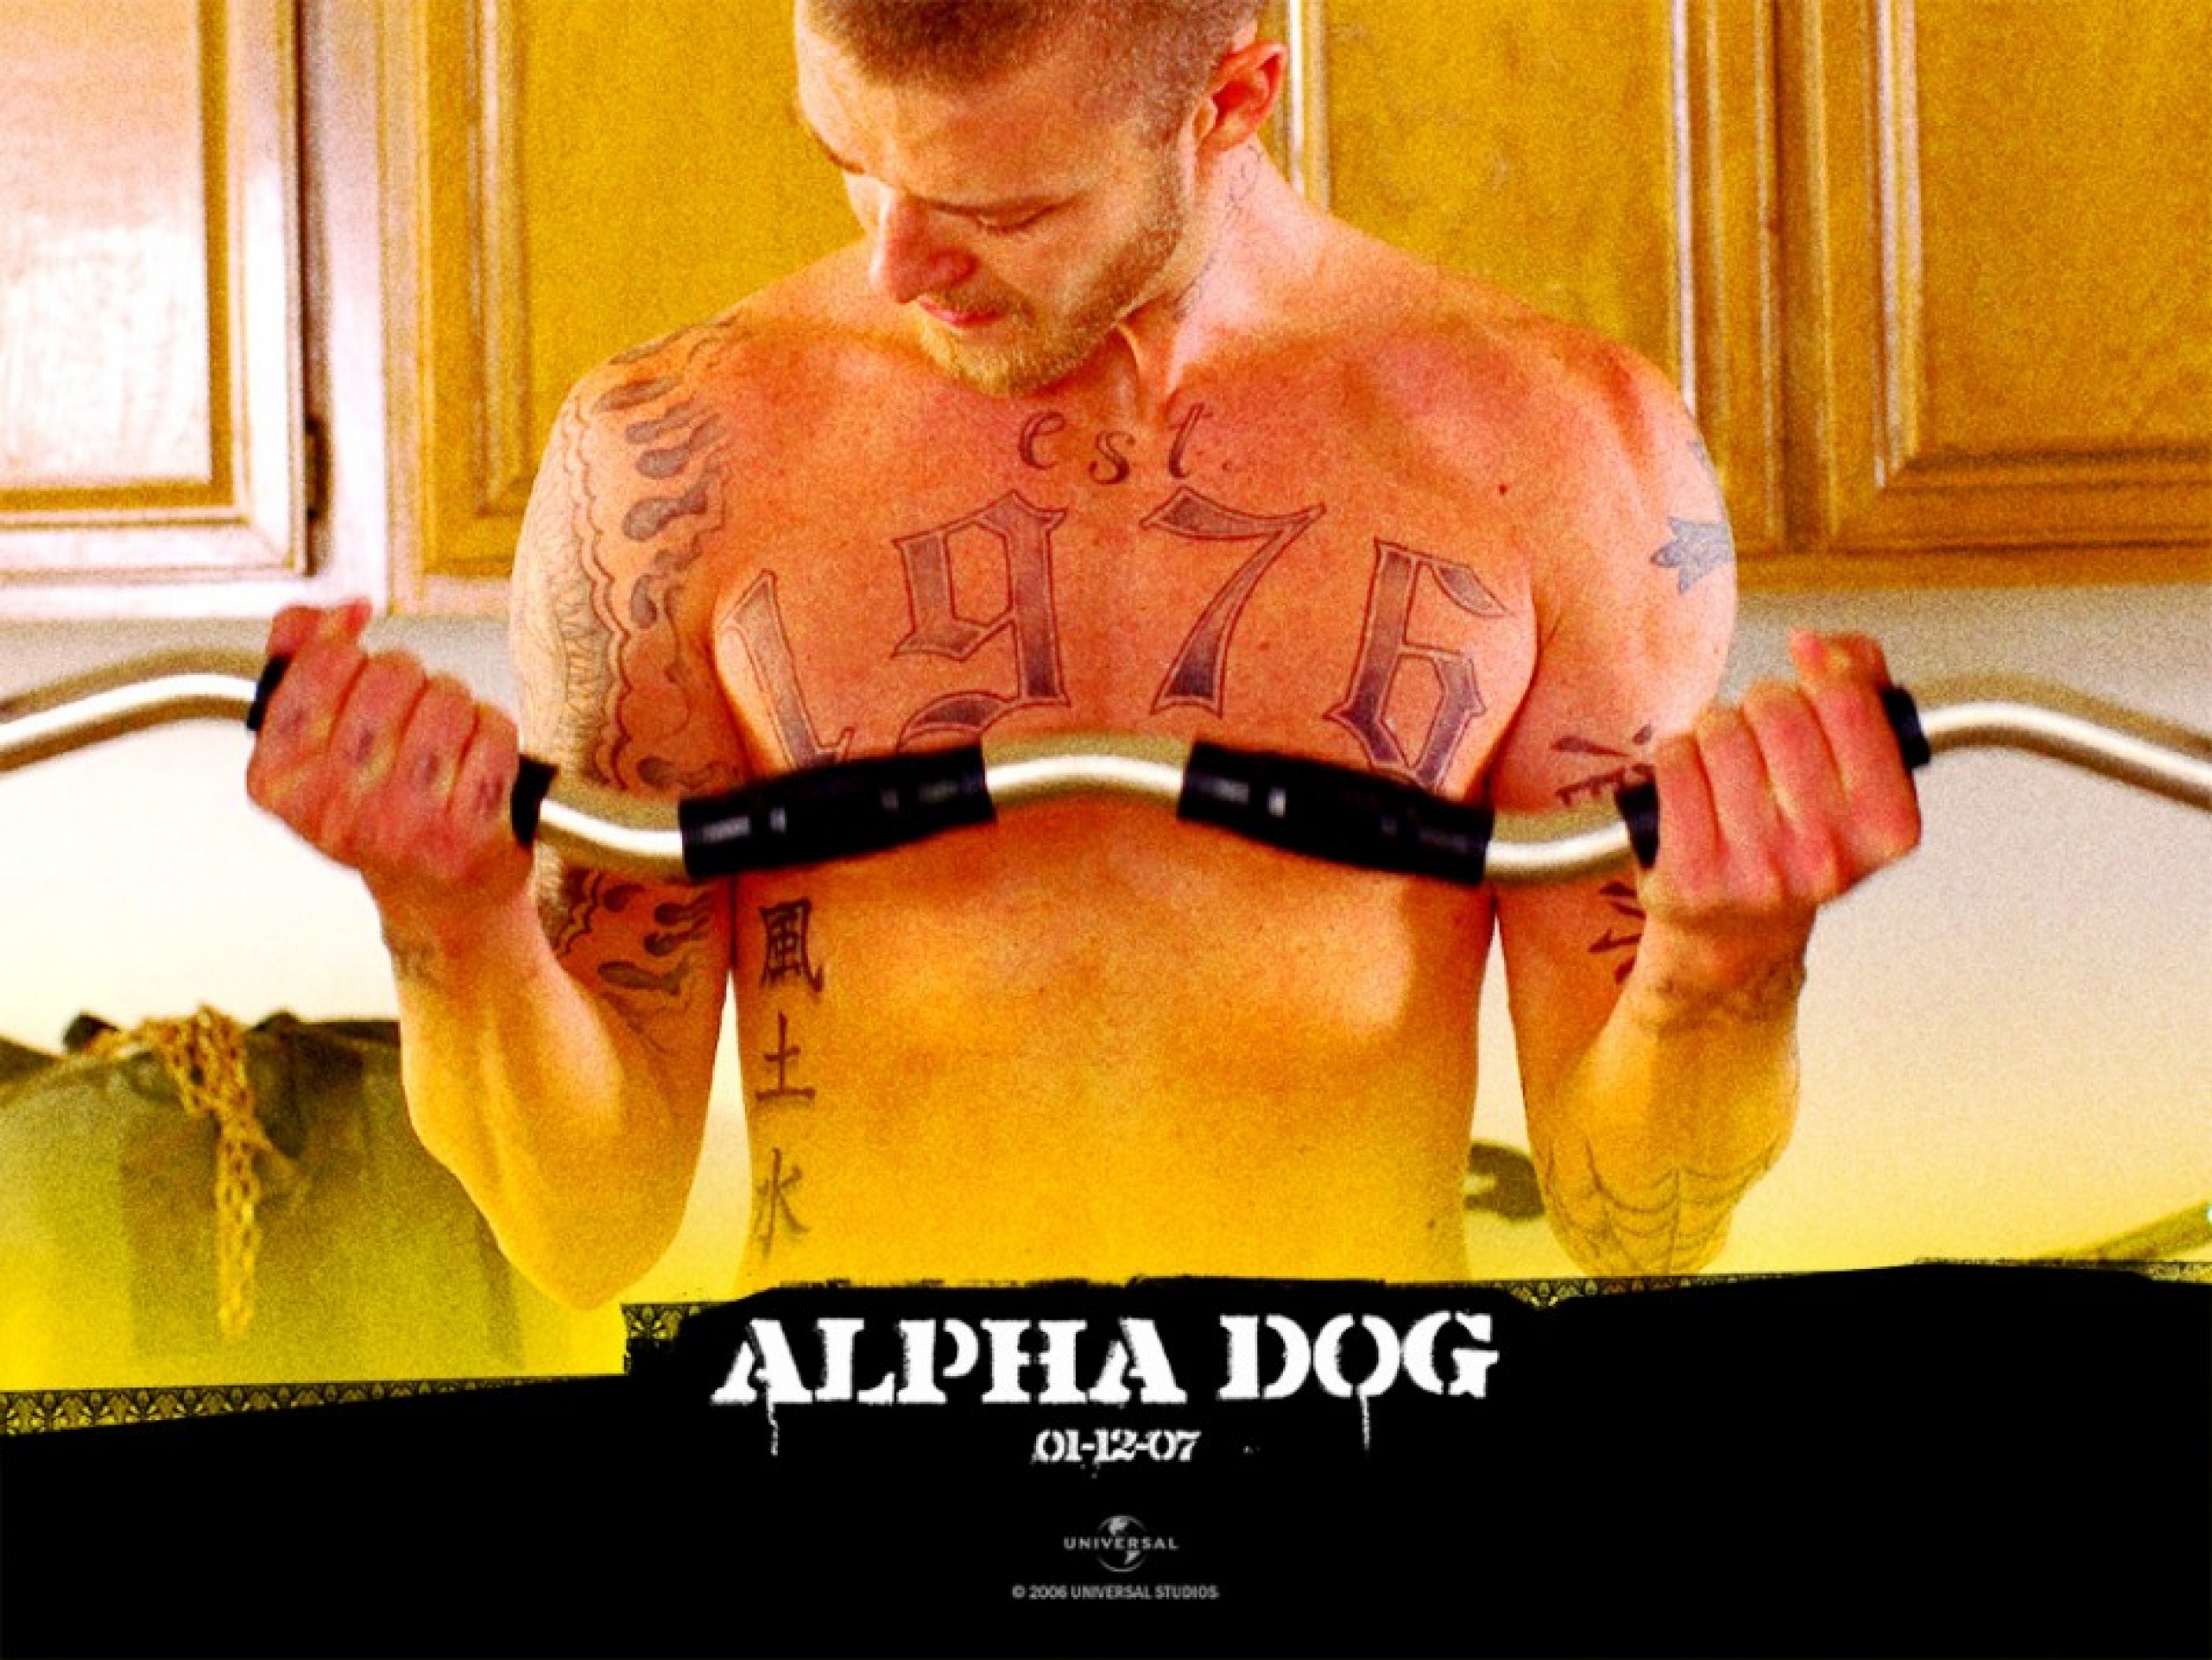 Playing gang member Frankie Ballenbacher in the 2007 film quotAlpha Dogs.quot